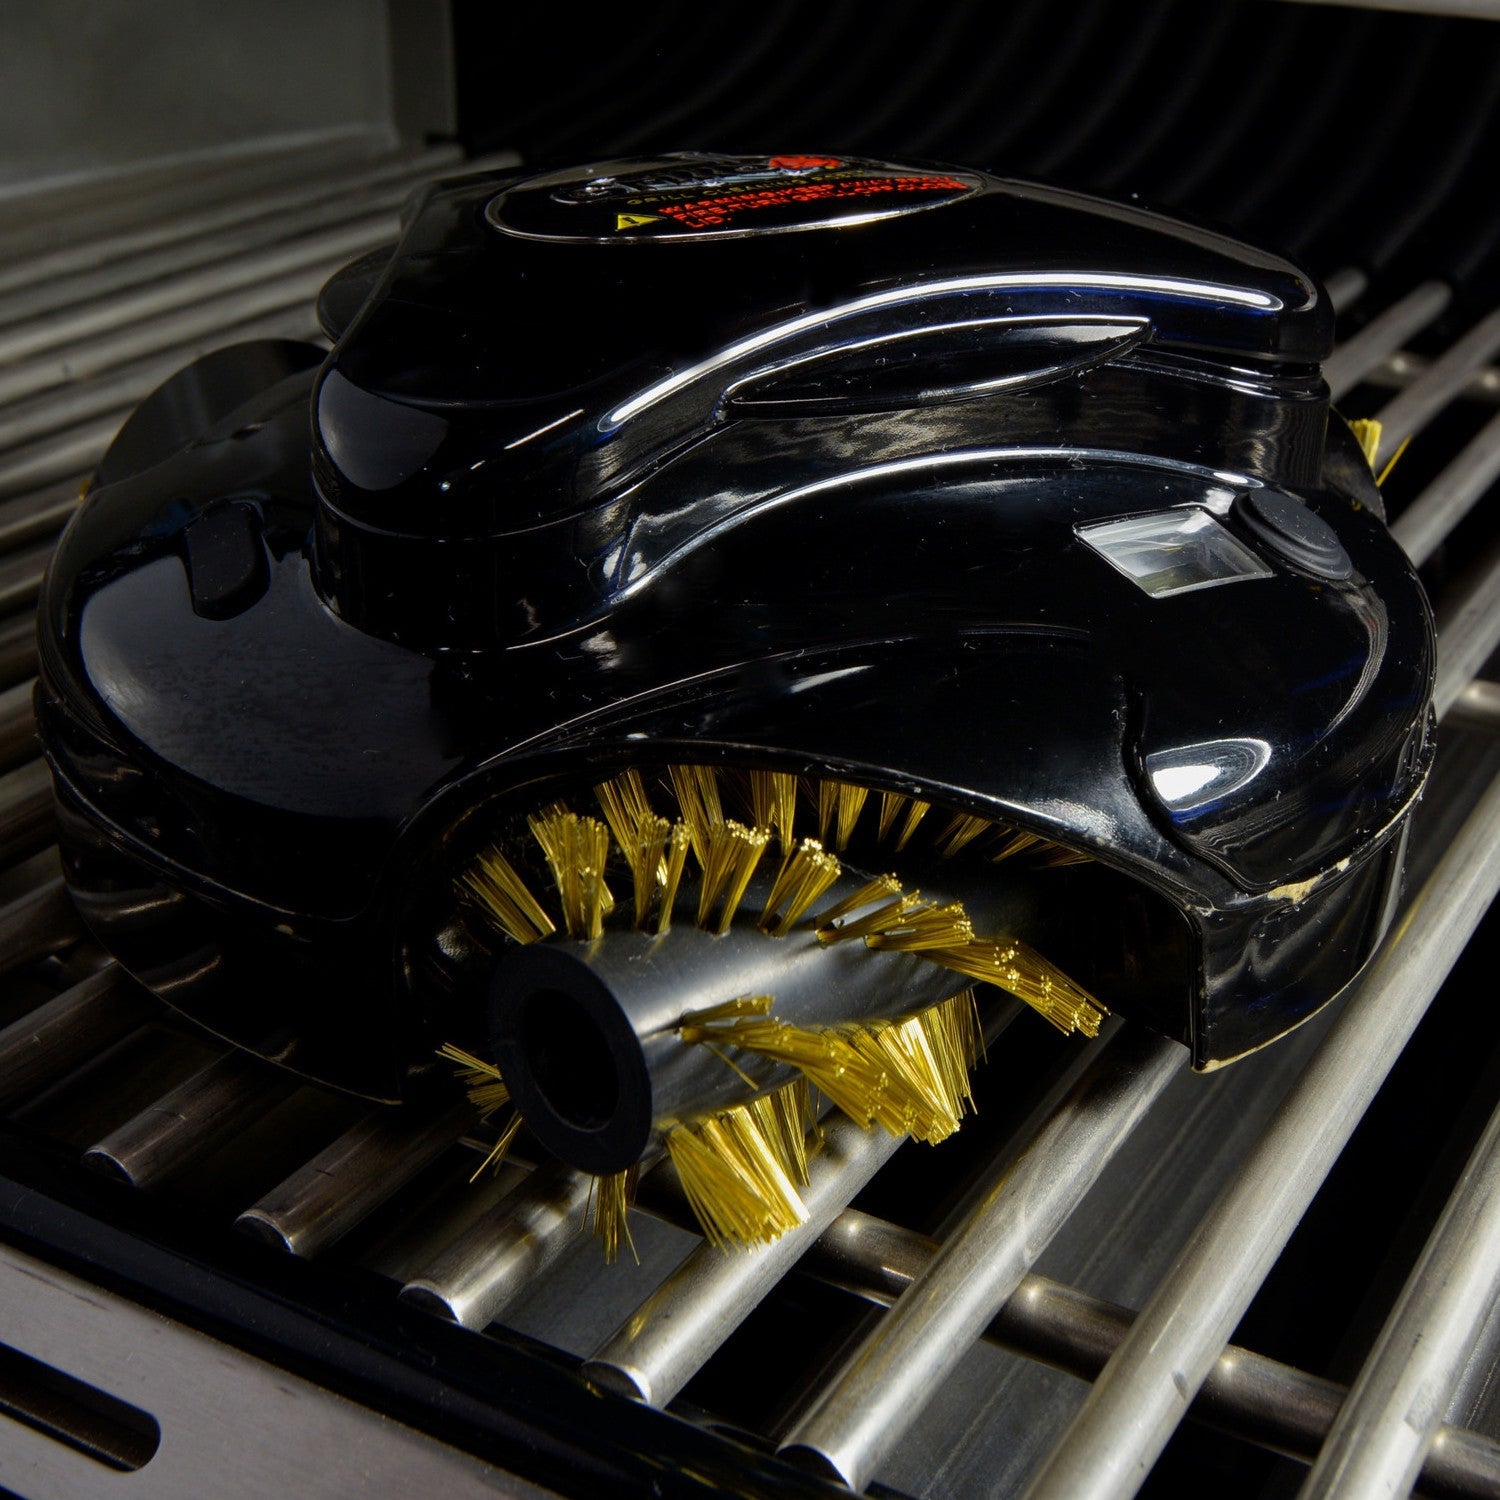 Grillbot – Automatic Grill Cleaning Robot